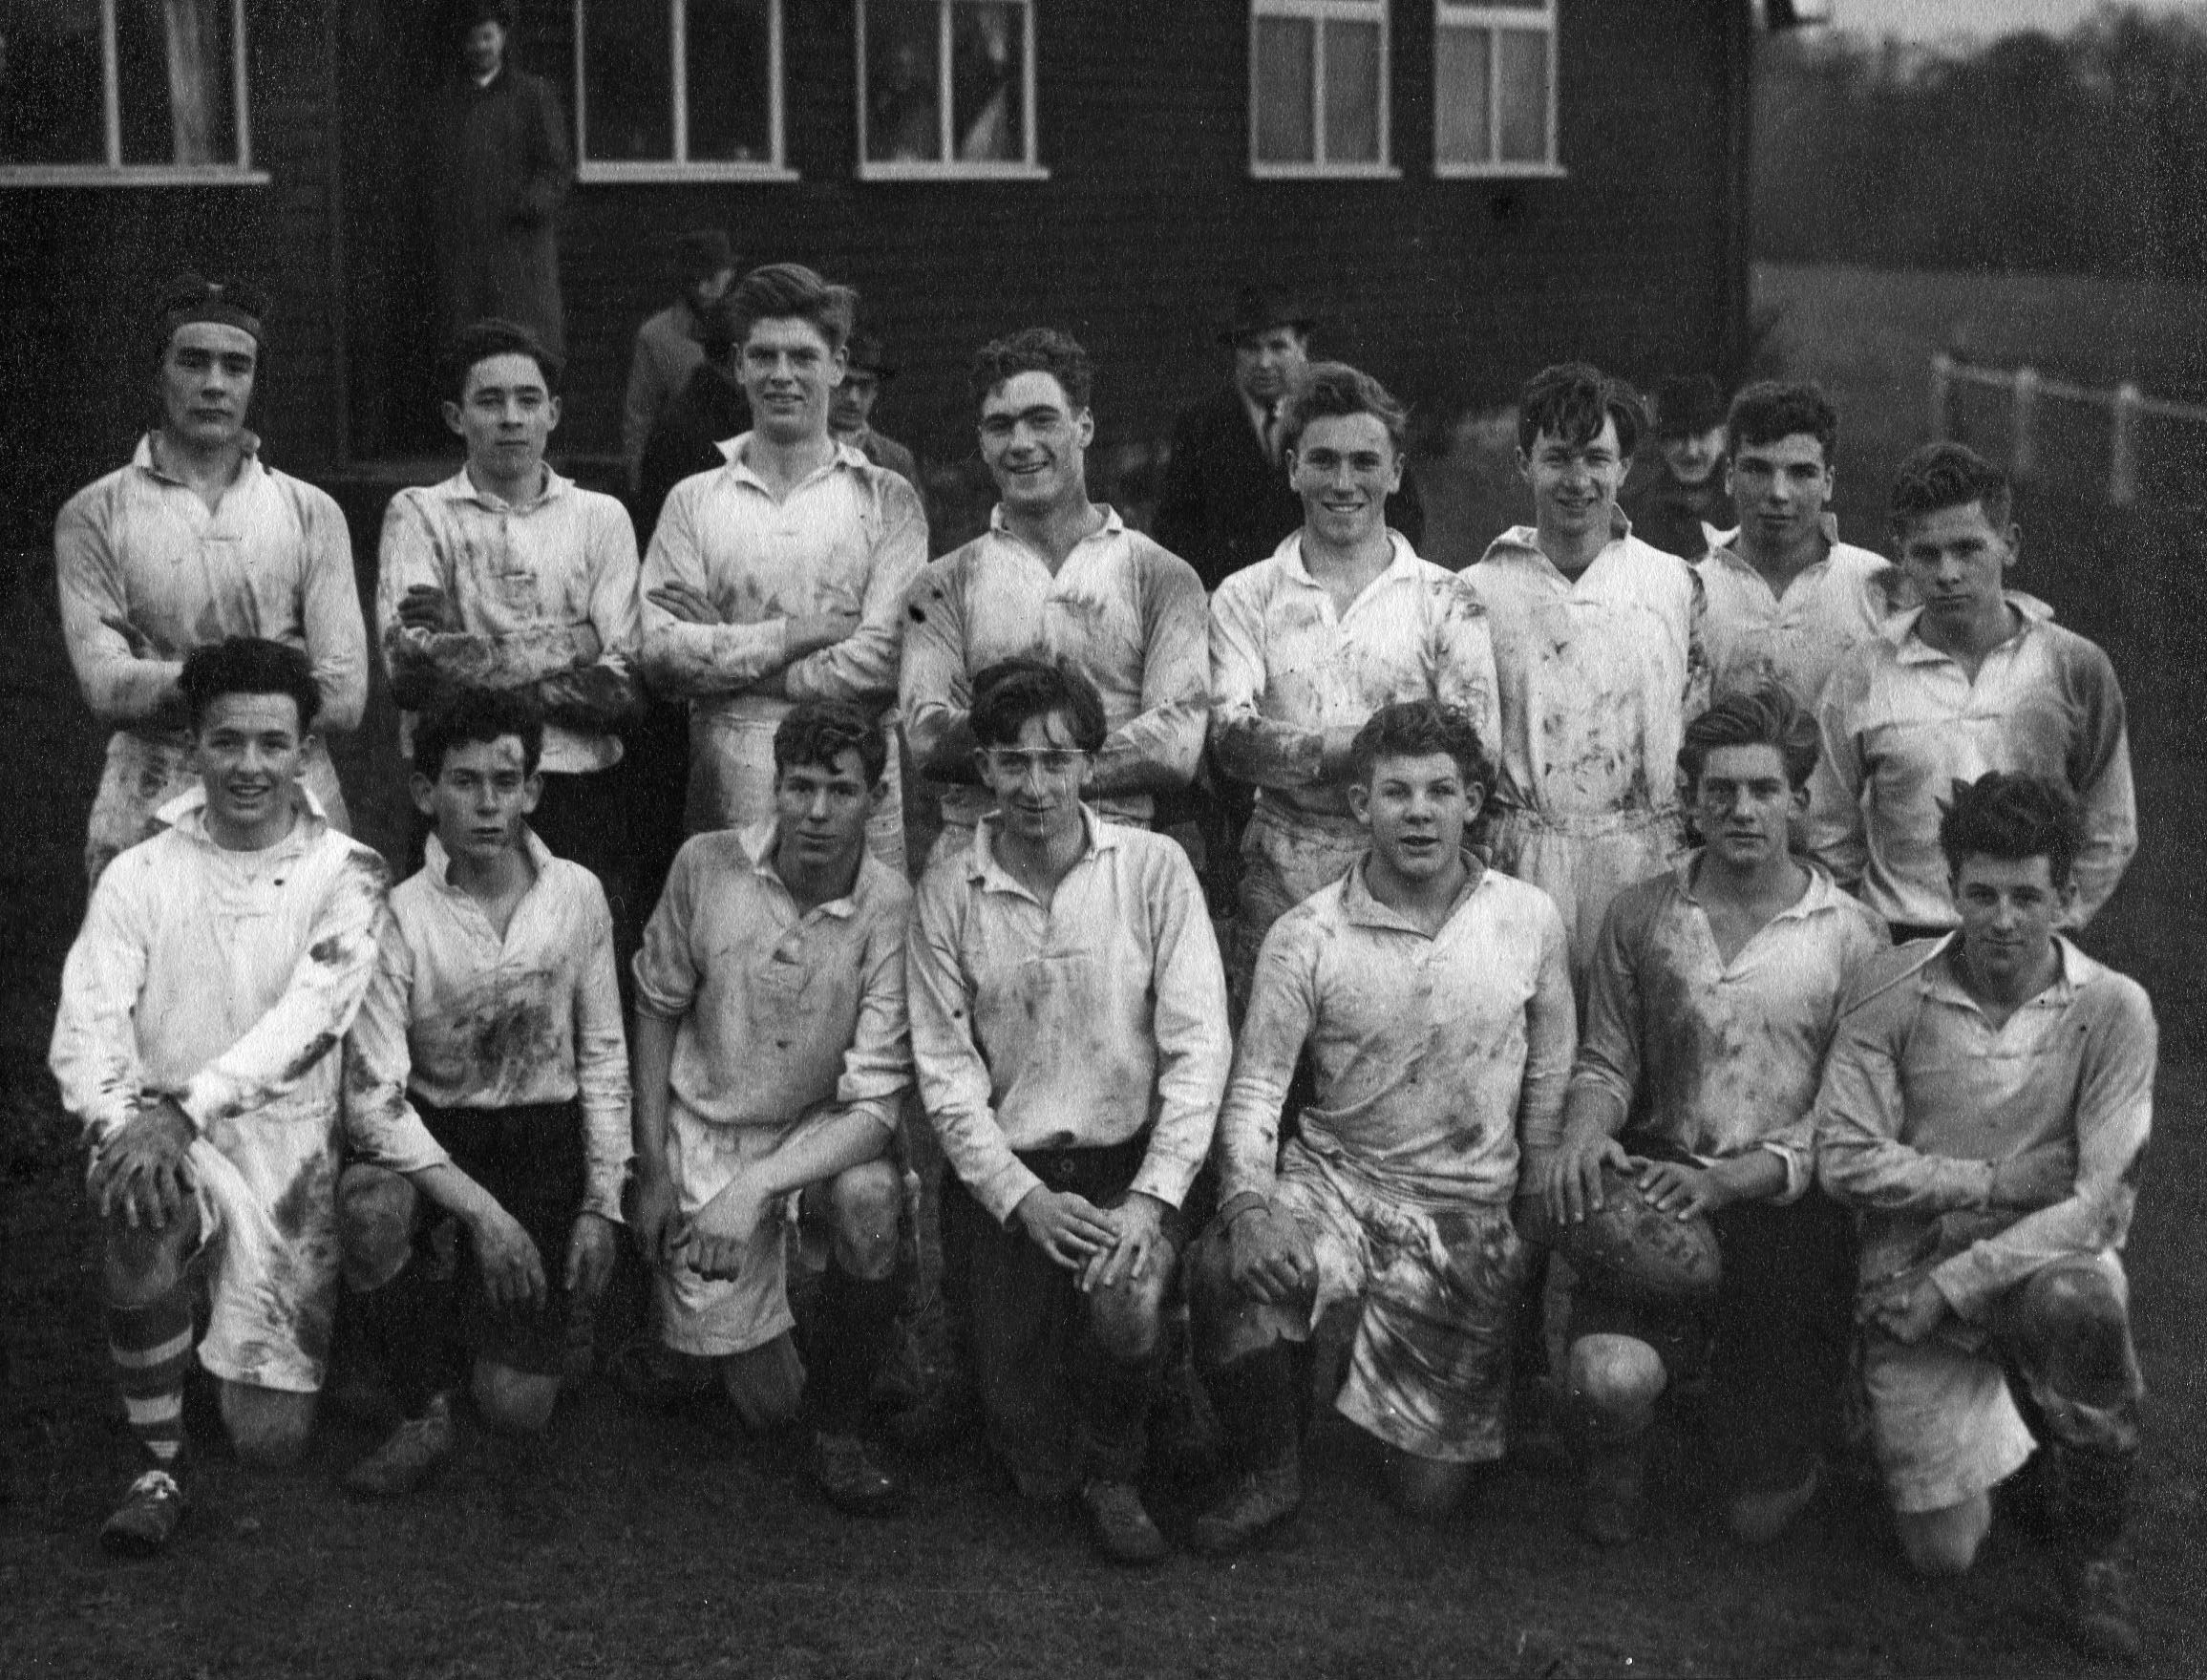 Photograph School Rugby 1948 Cheshire West v Cheshire East